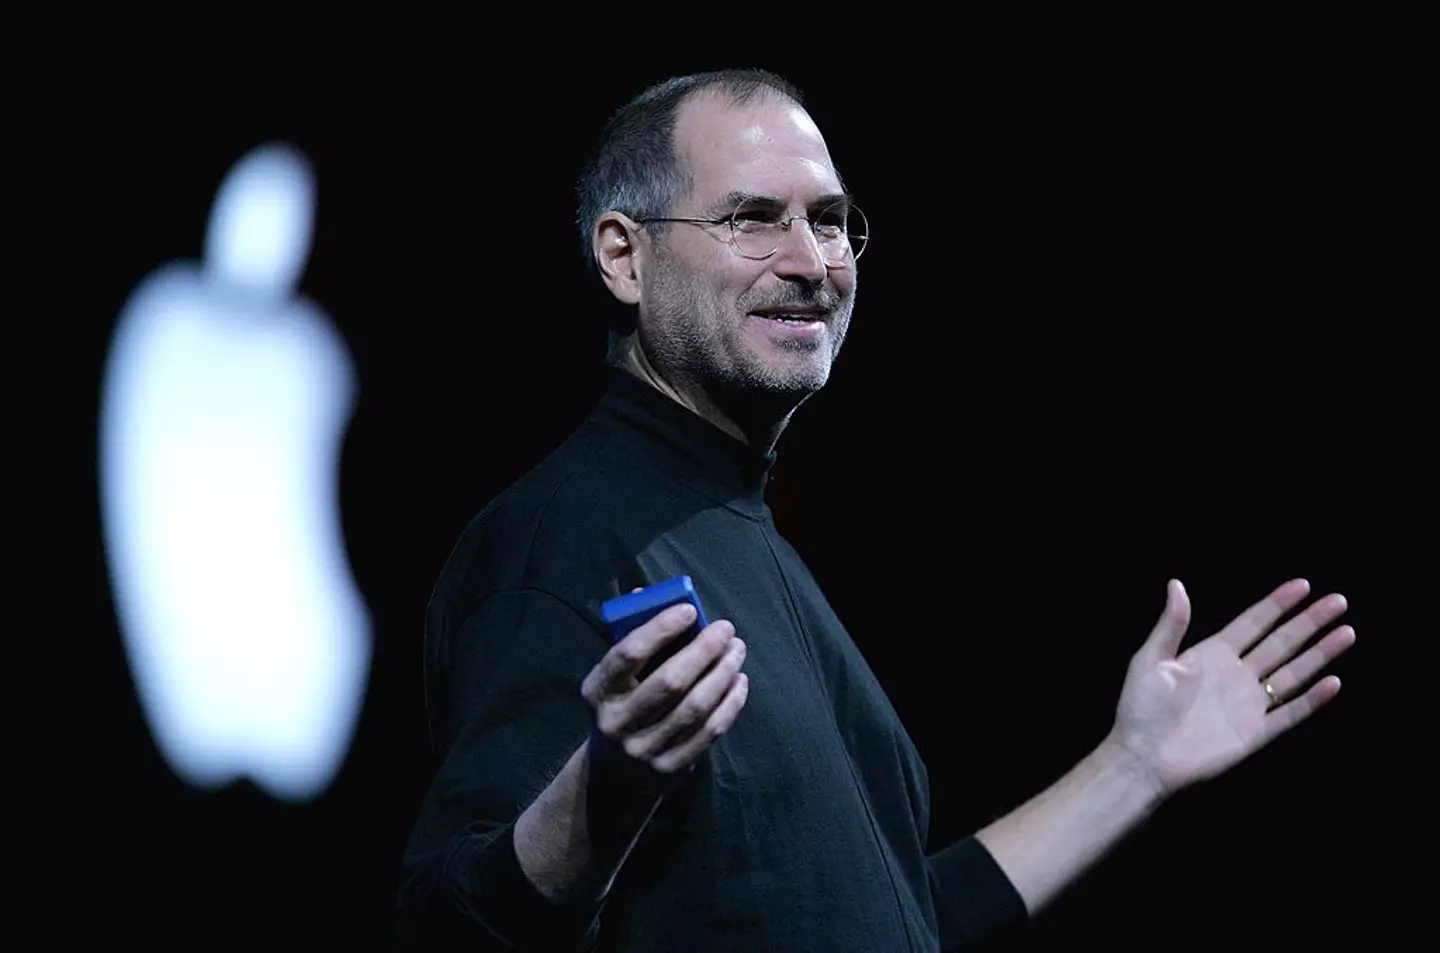 Steve Jobs once revealed the meaning behind the 'i' in iPhone.